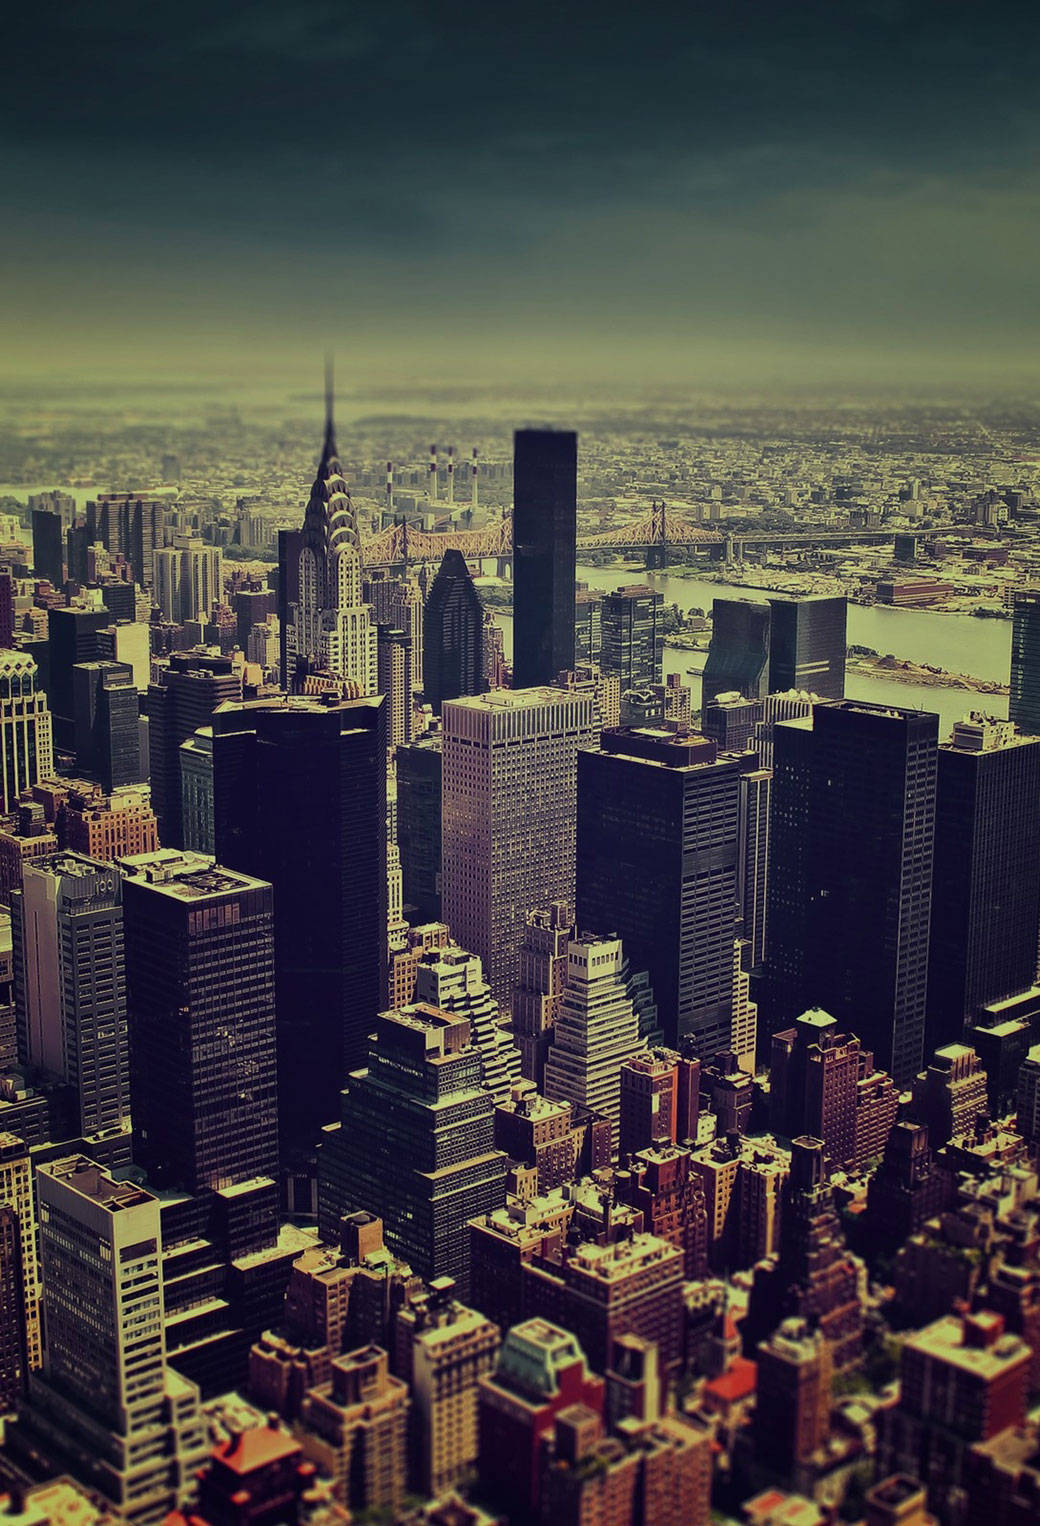 Enjoy the picturesque skyline of New York City while using your iPhone Wallpaper